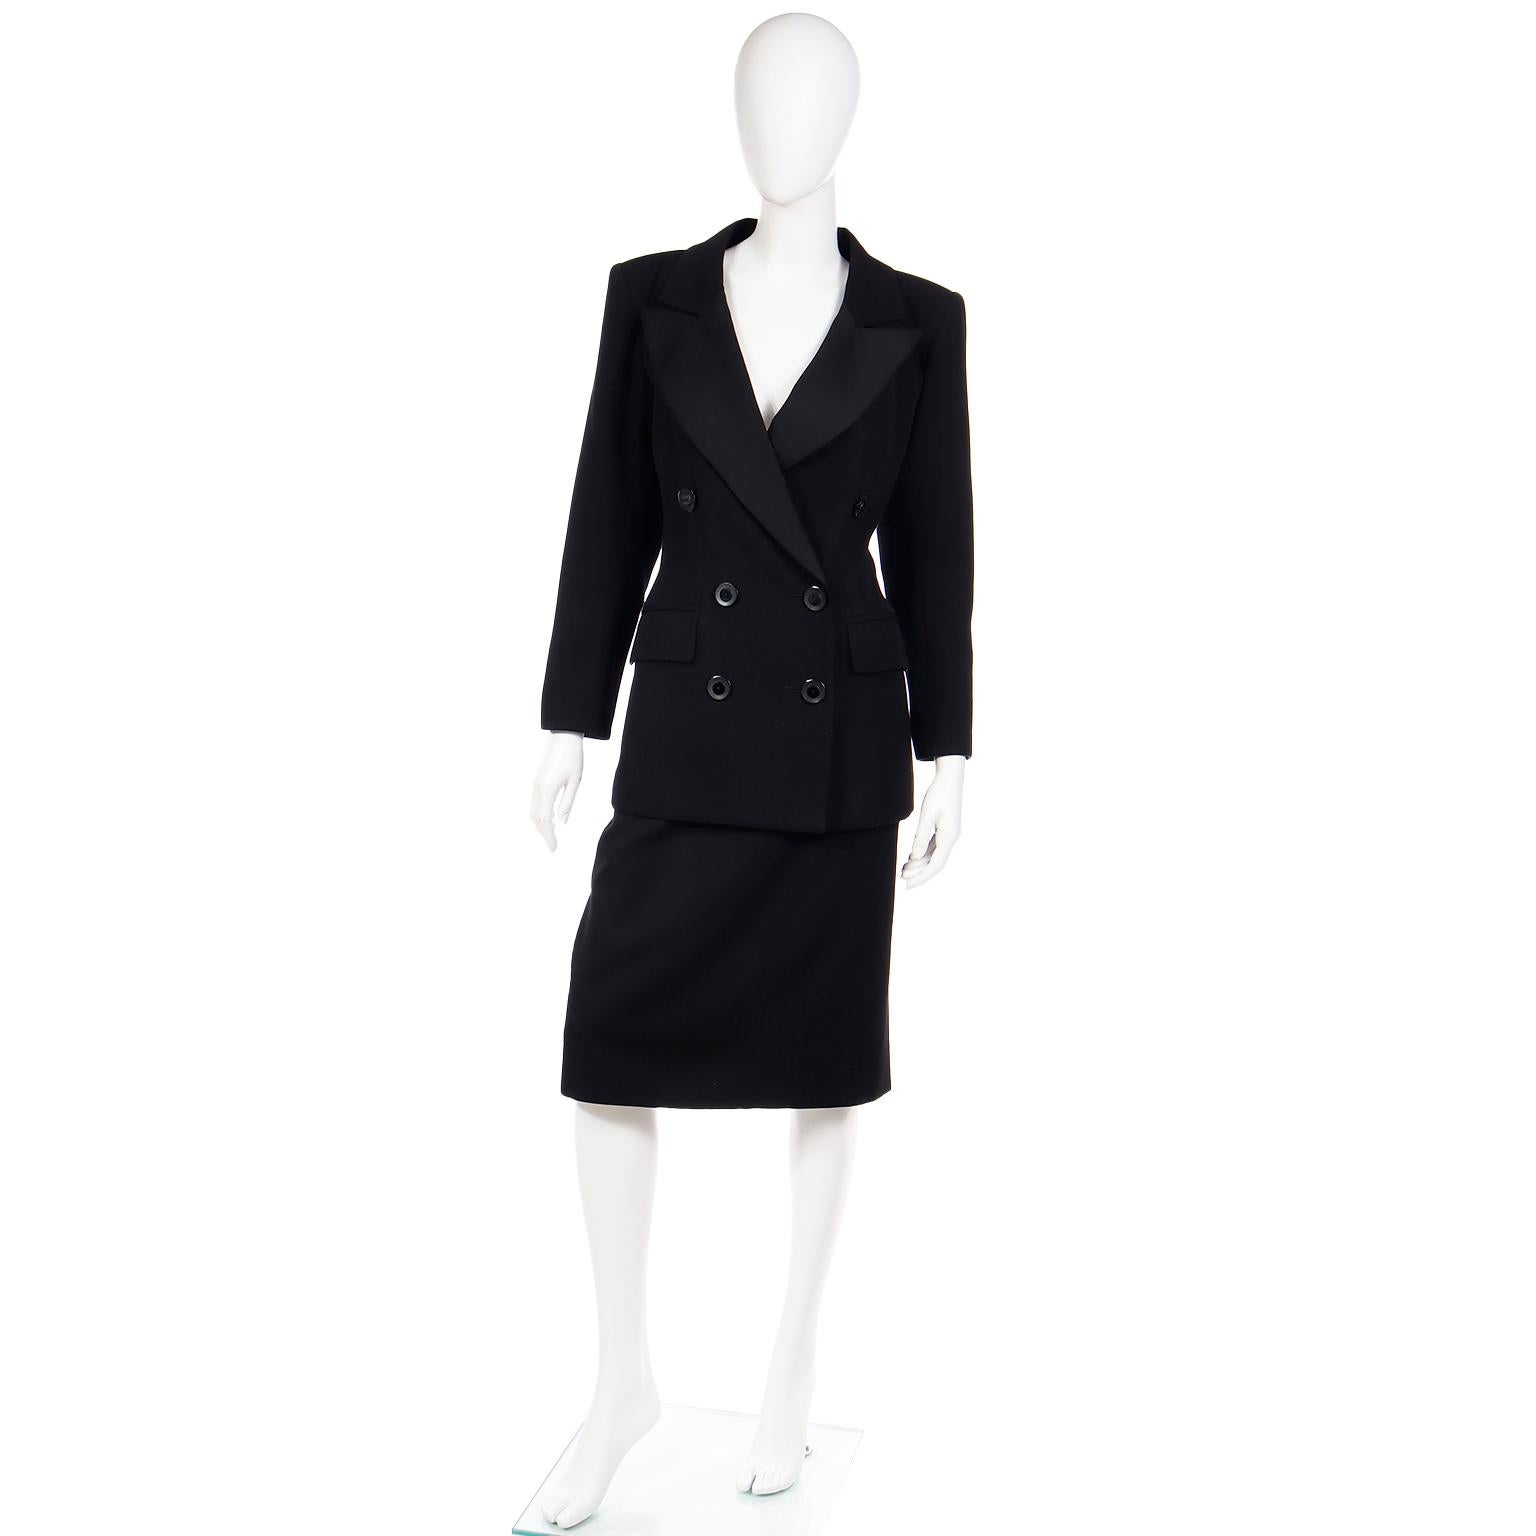 This is a gorgeous vintage YSL skirt suit from the Yves Saint Laurent Spring/Summer 1987 collection. This suit has a double breasted black tuxedo style jacket paired with a black wool pencil skirt. Of course, you can always wear the pieces